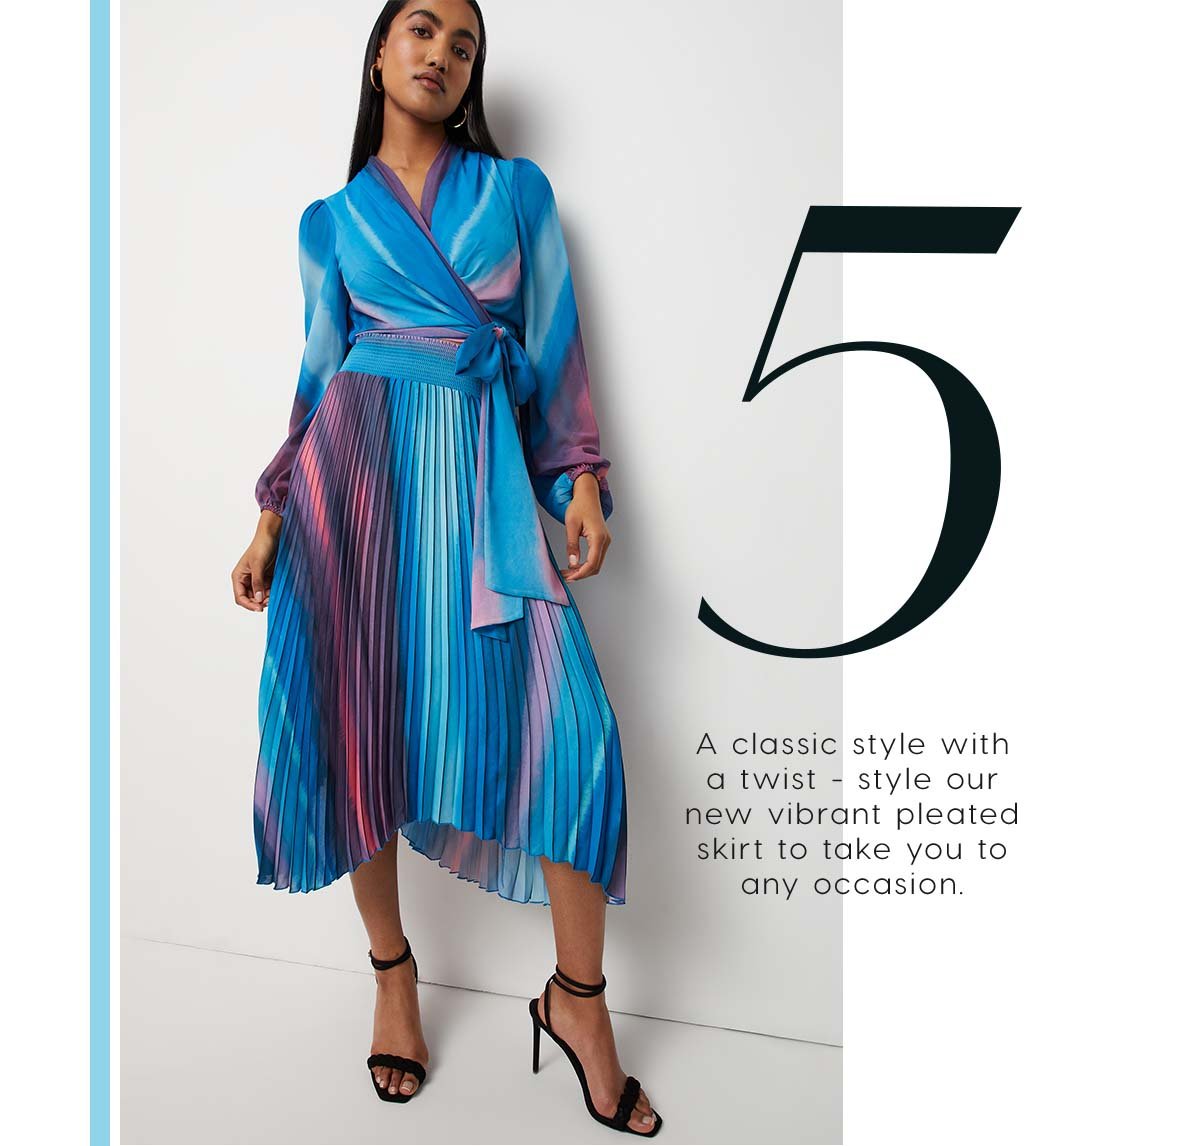 5. A classic style with a twist - style our new vibrant pleated skirt to take you to any occasion. 